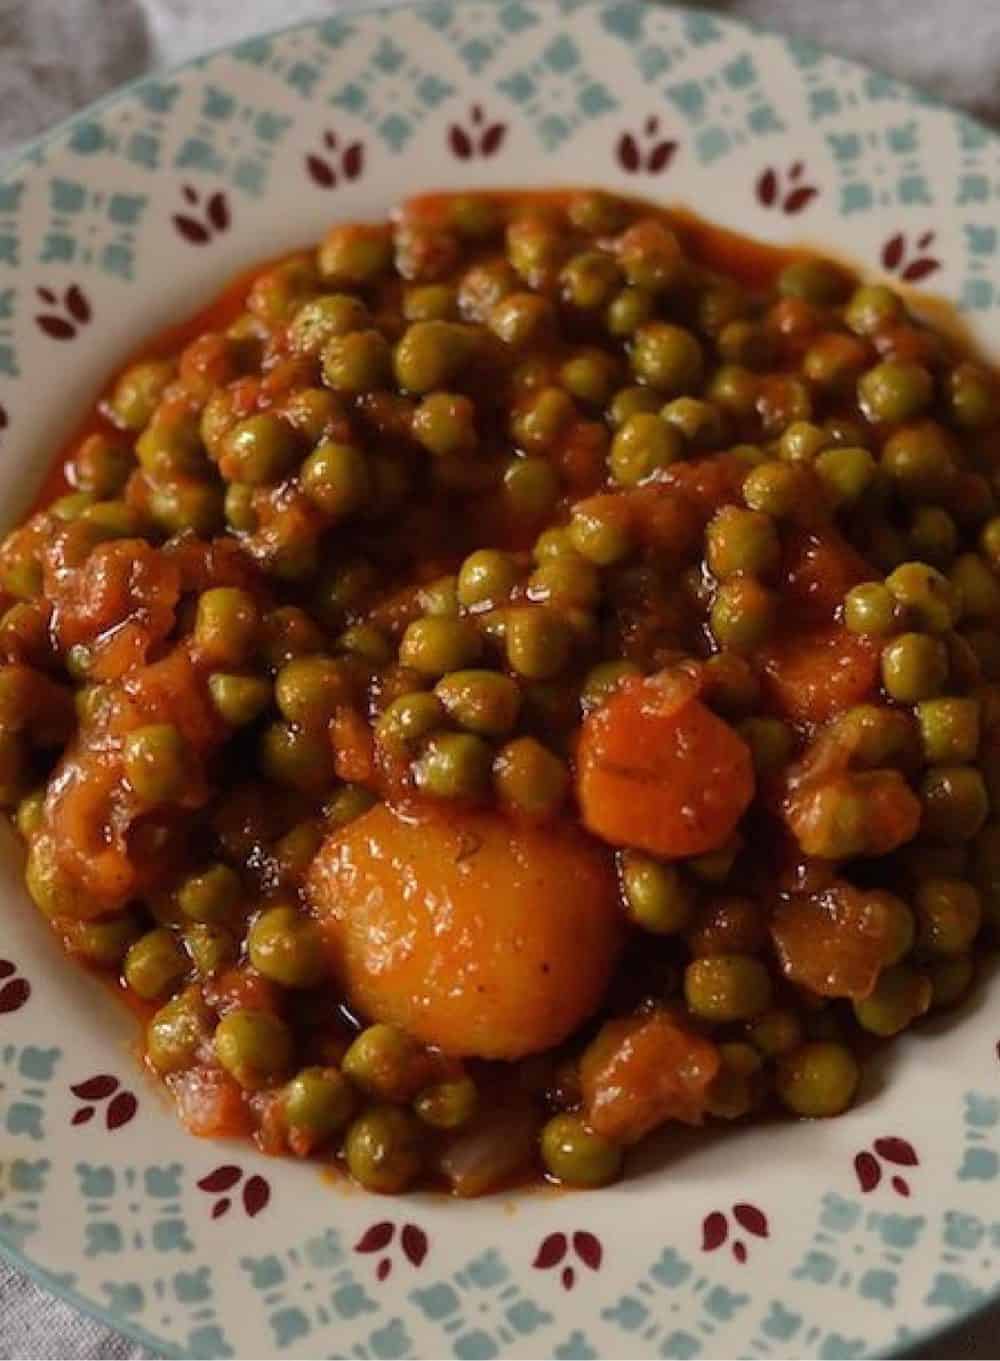 Traditional Pea dish in a blue plate